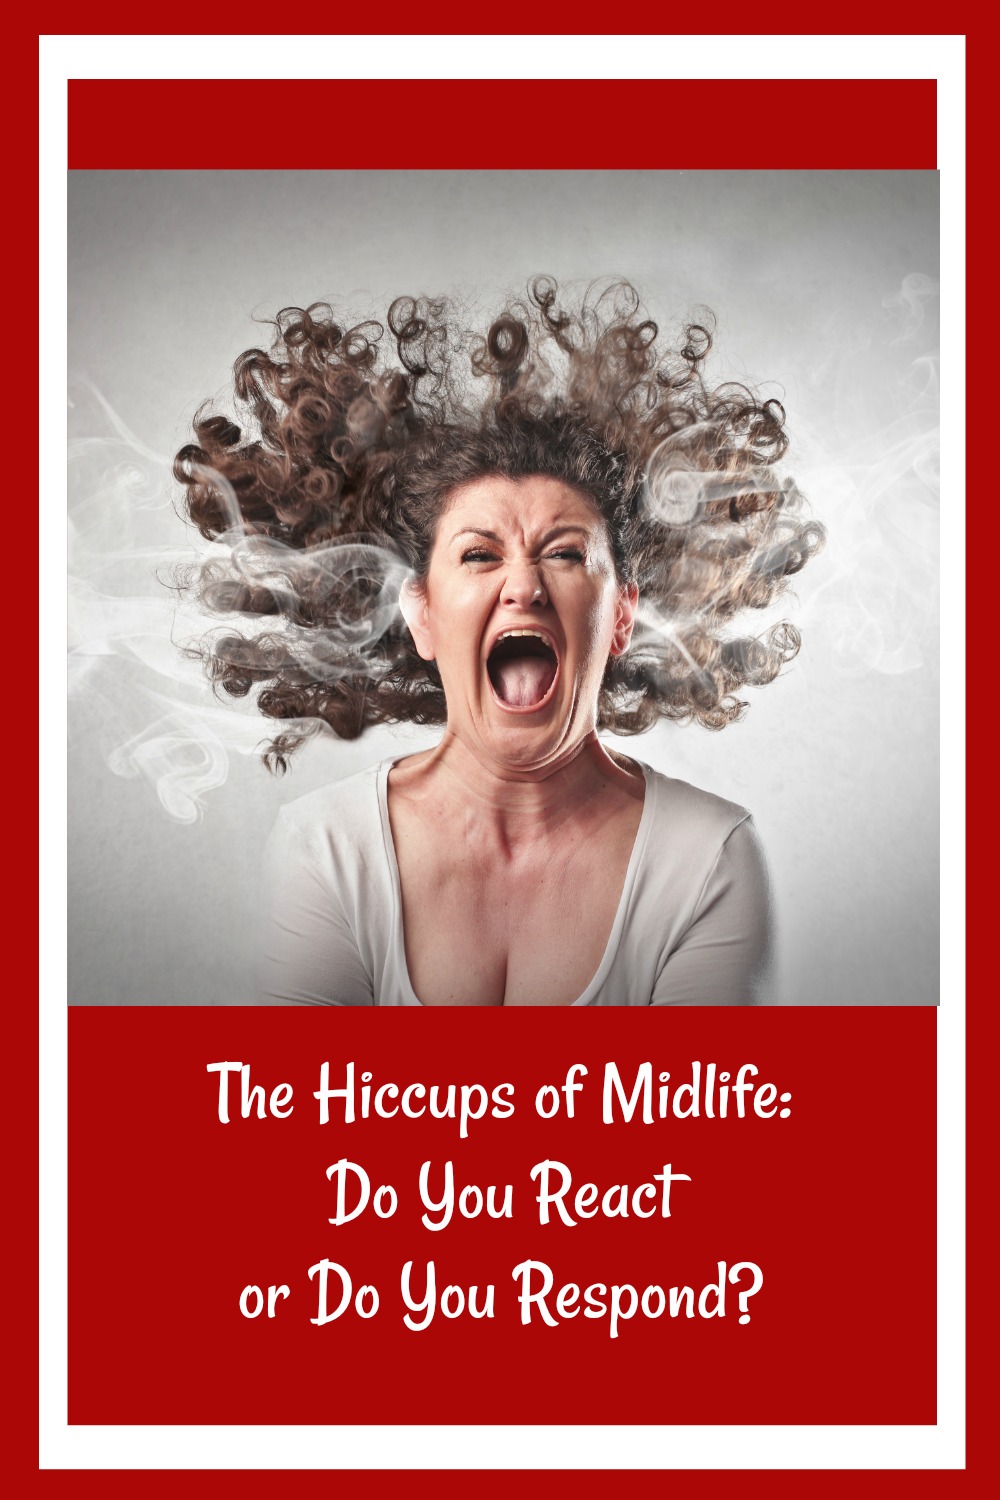 The Hiccups of Midlife: Do You React or Do You Respond?